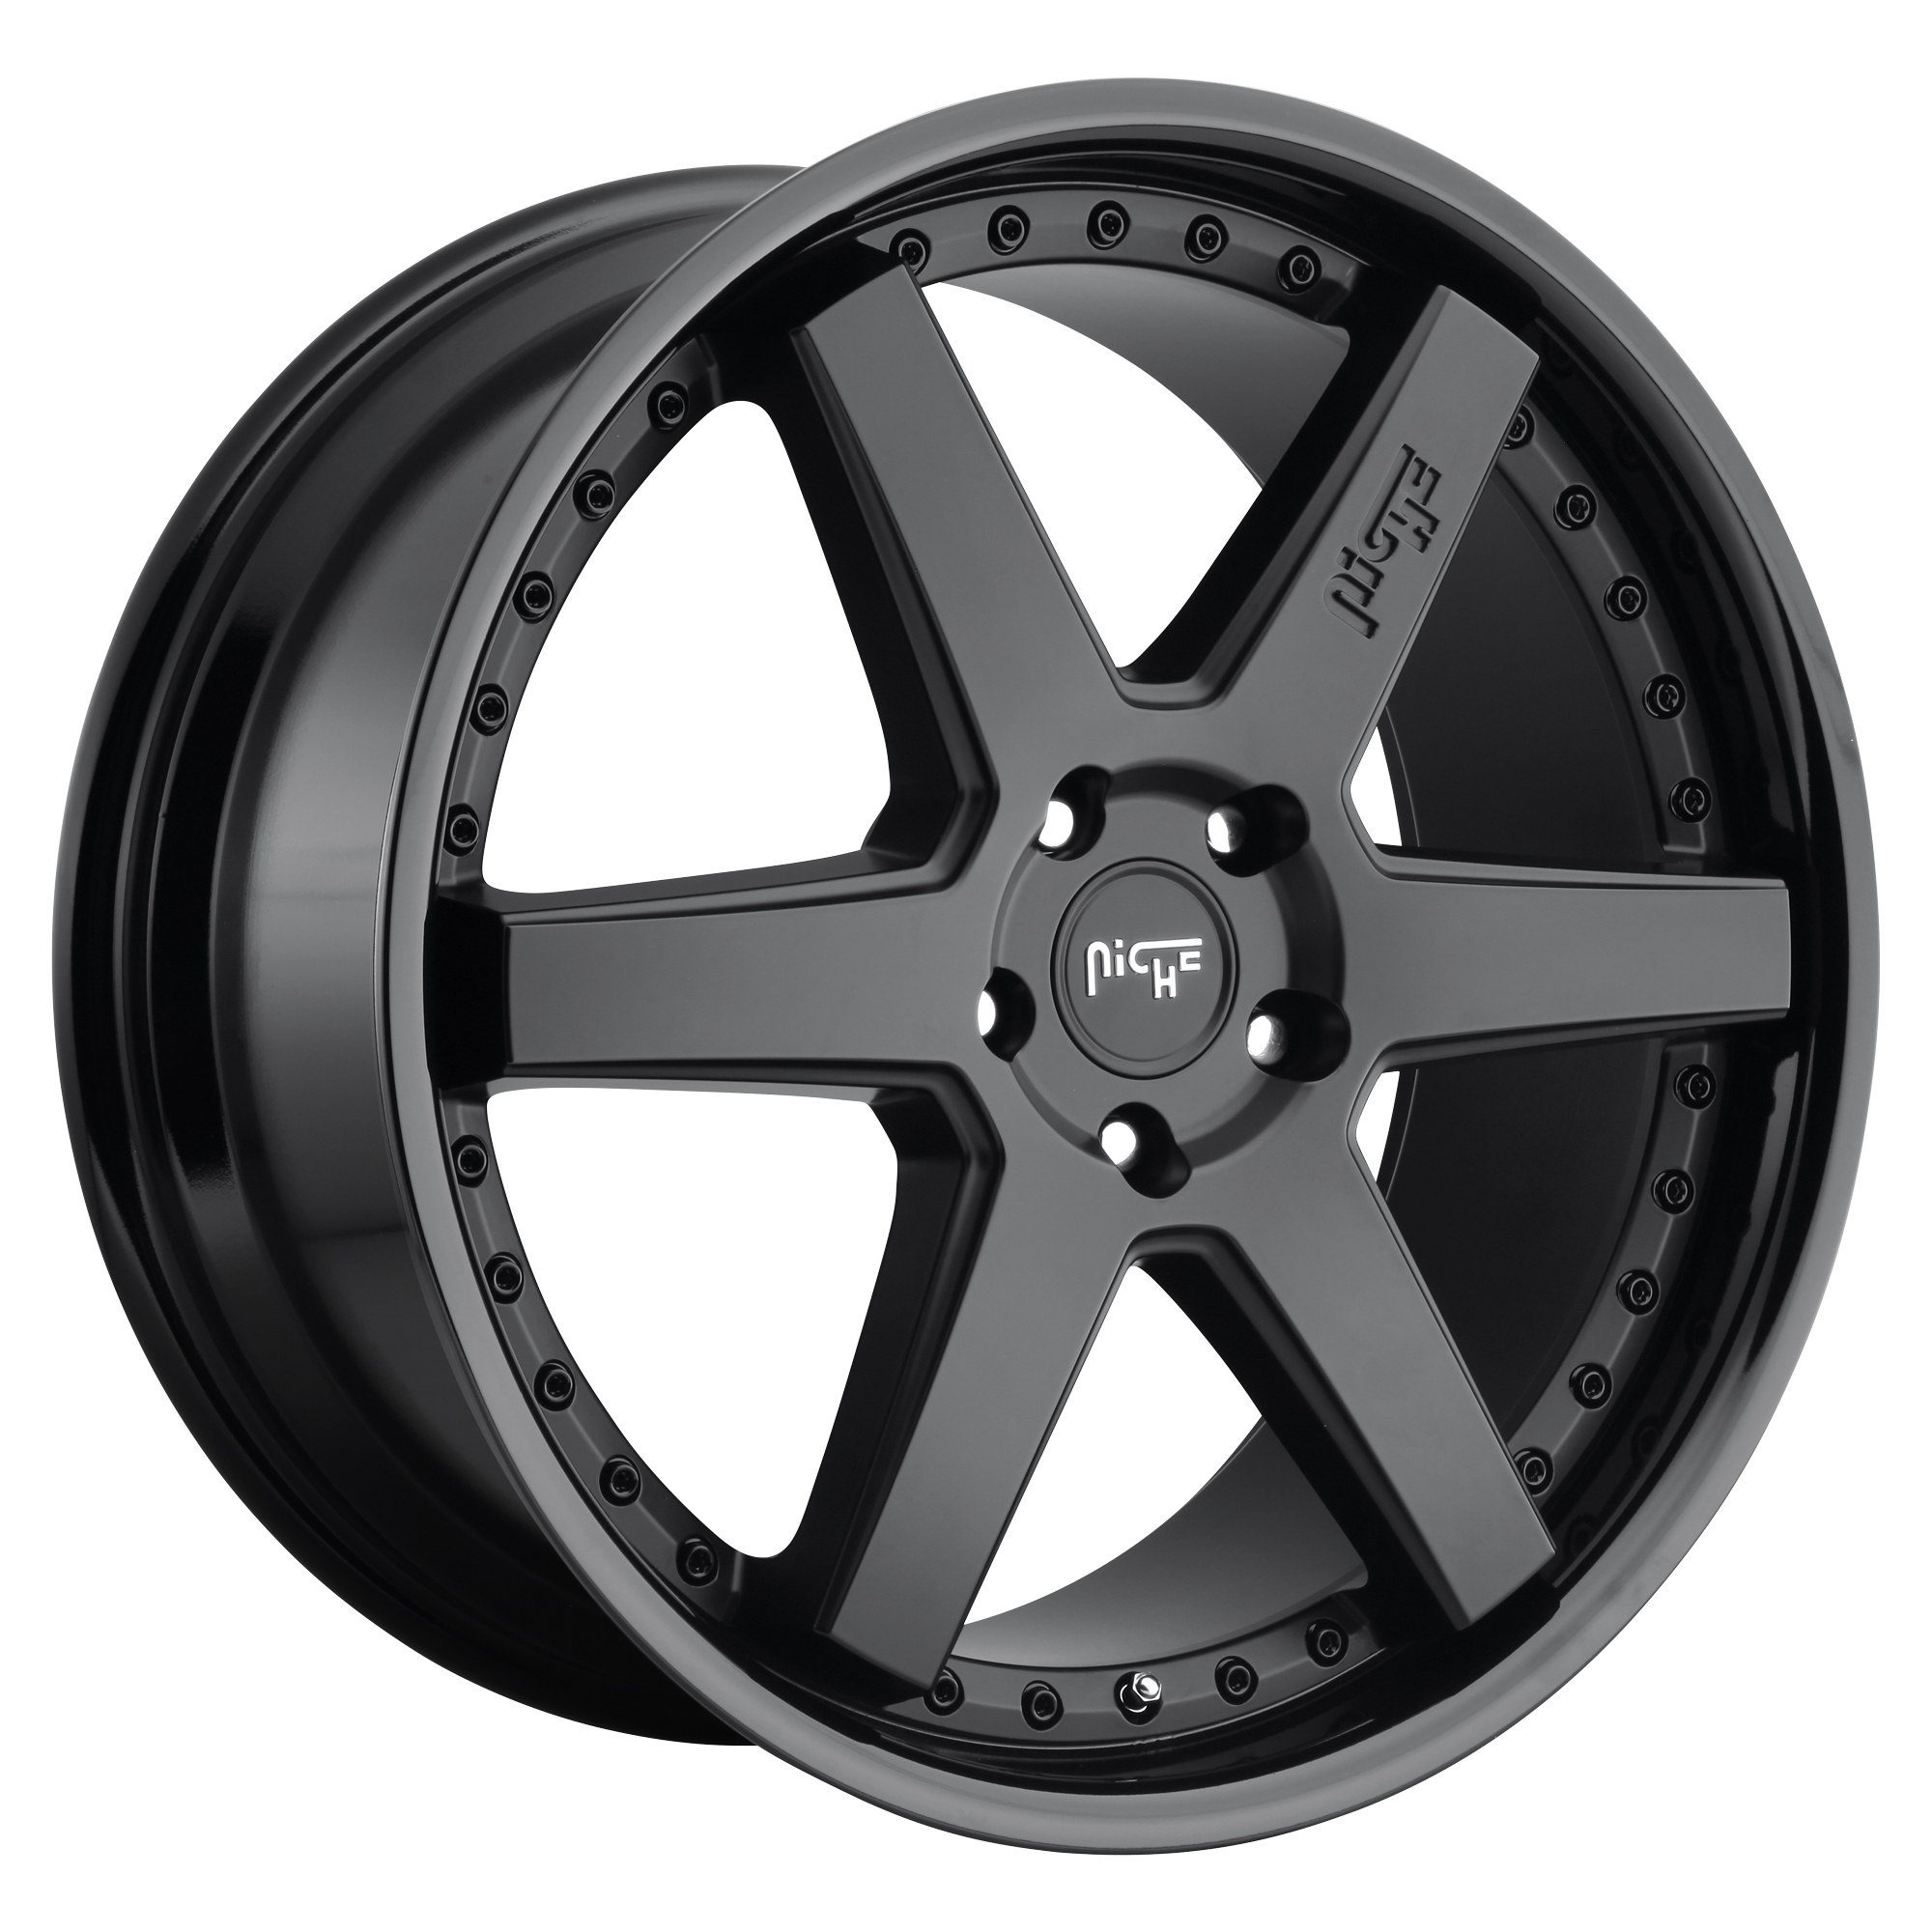 ALTAIR 19x8.5 5x108.00 GLOSS BLACK MATTE BLACK (40 mm) - Tires and Engine Performance